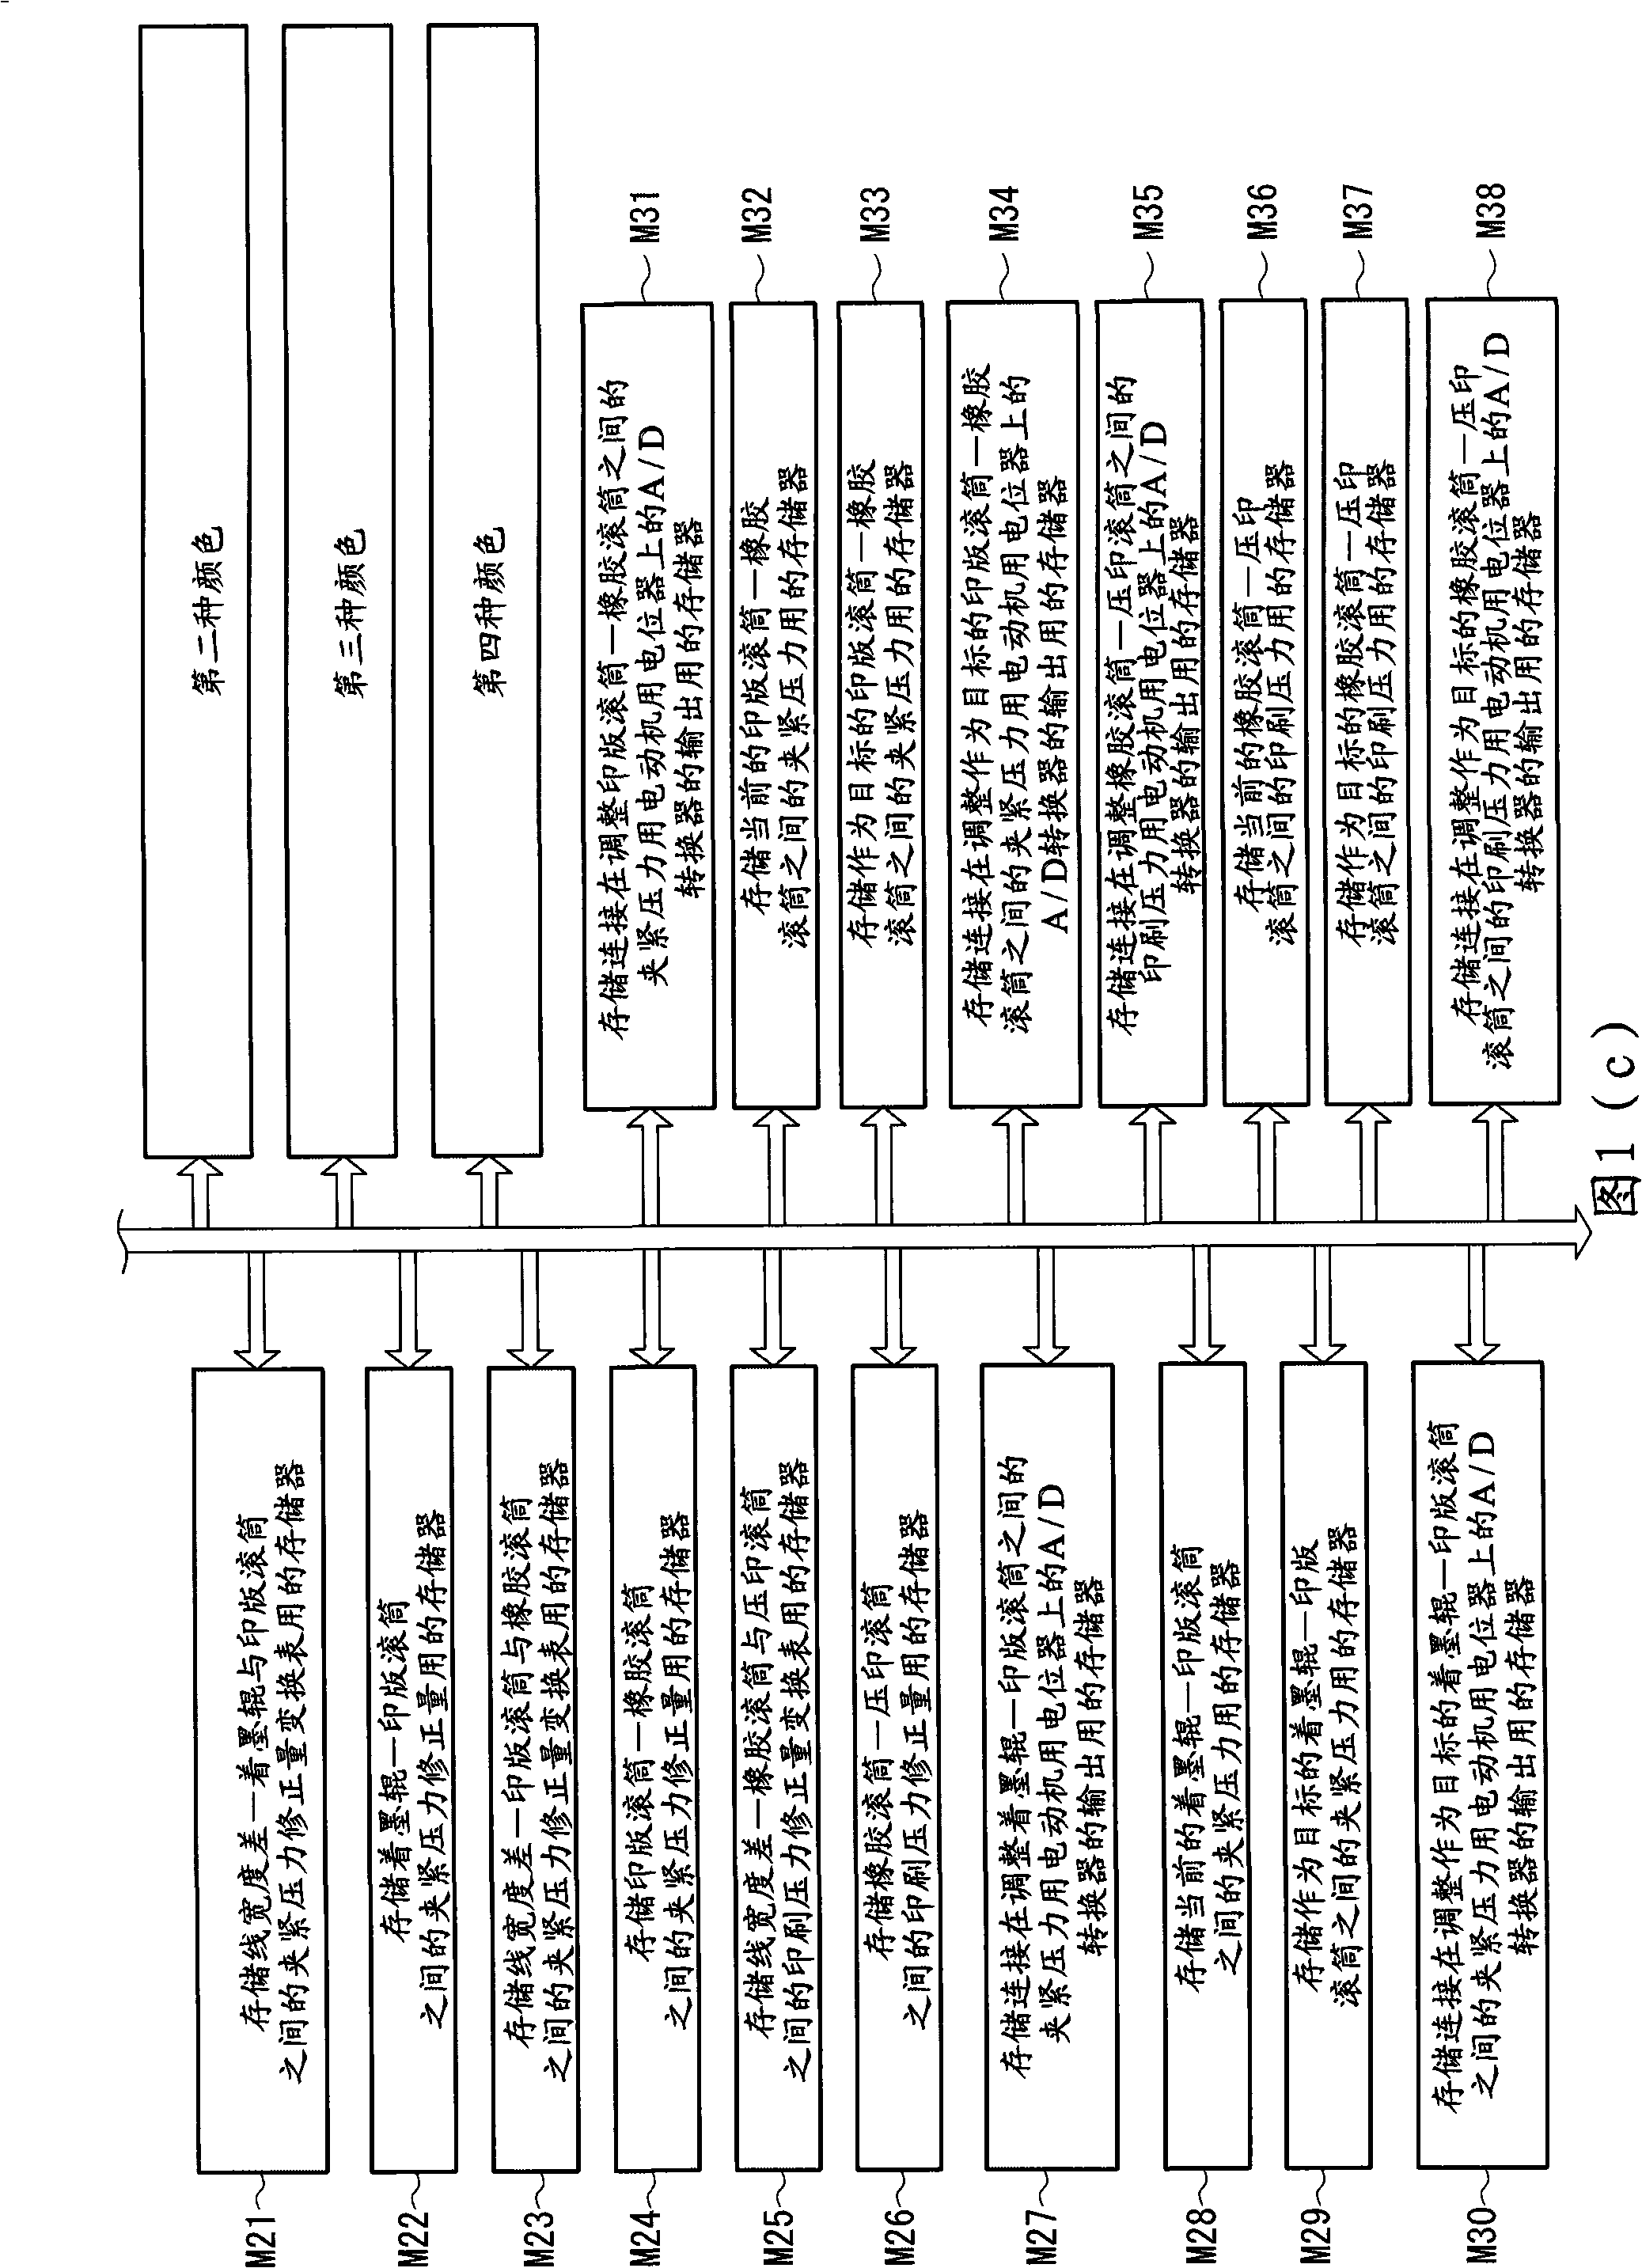 Printing quality control method and system for relief printing press